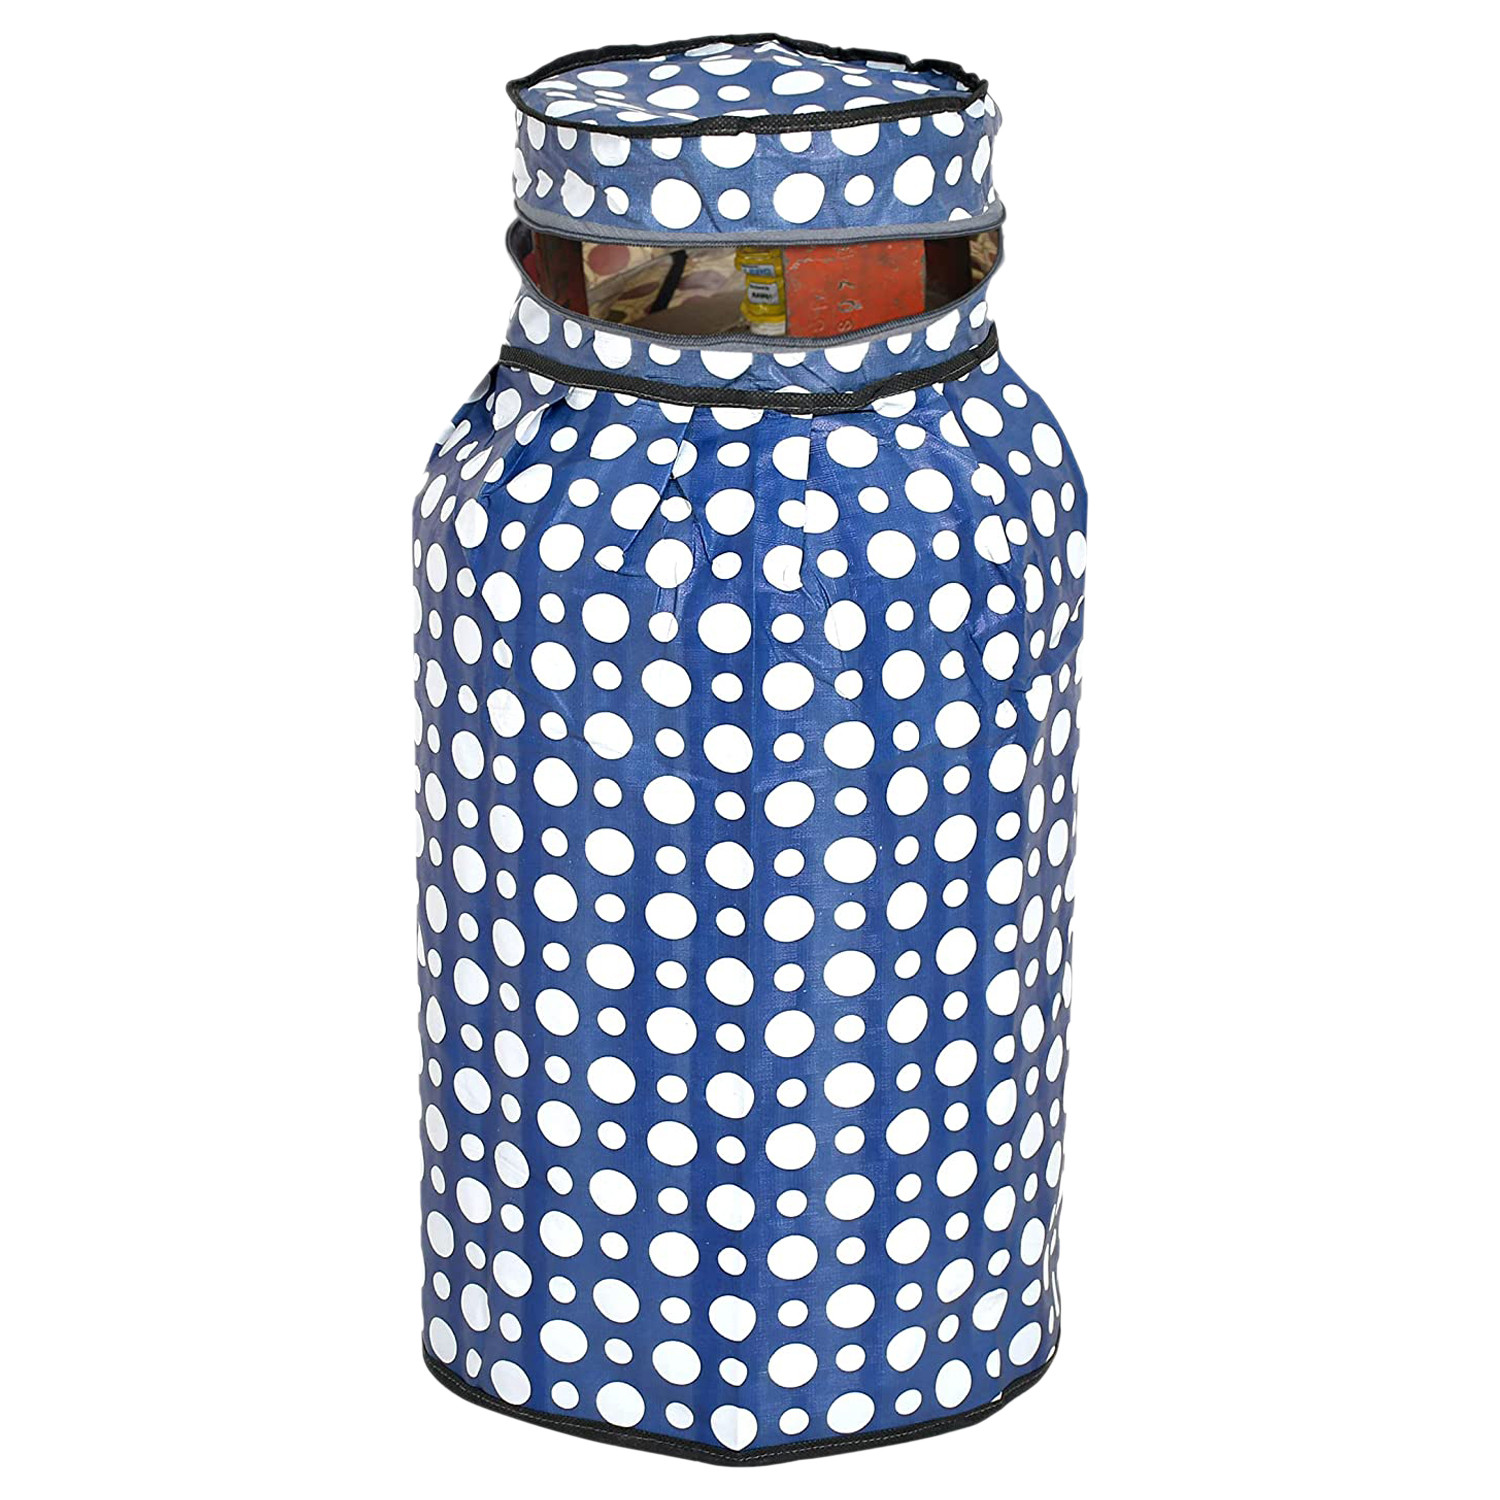 Kuber Industries PVC Dot Print Waterproof and Dustproof Cylinder Cover For Home & Kitchen (Blue)